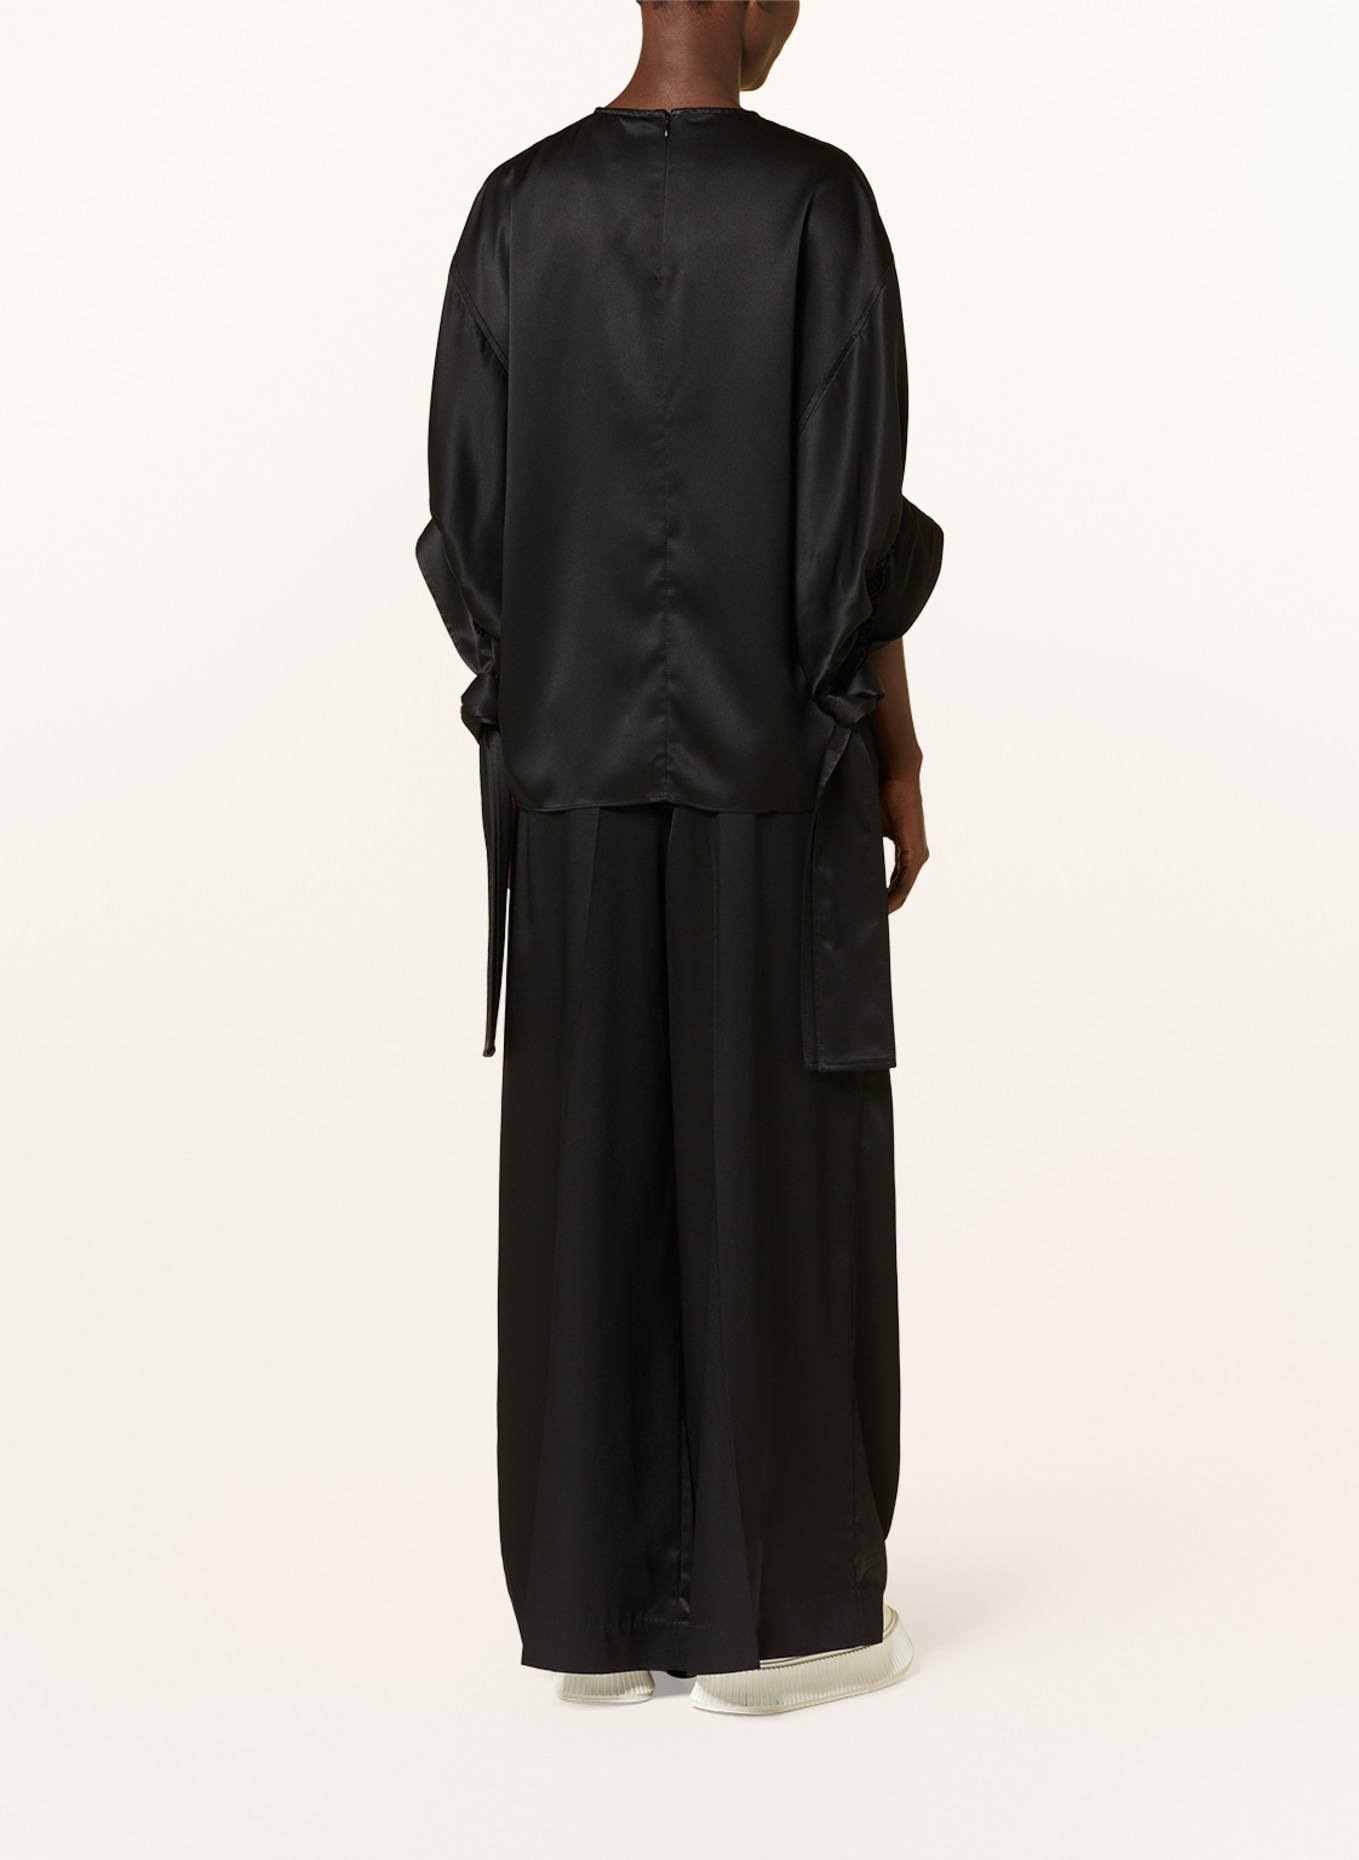 JW ANDERSON Shirt blouse made of satin with 3/4 sleeves, Color: BLACK (Image 3)